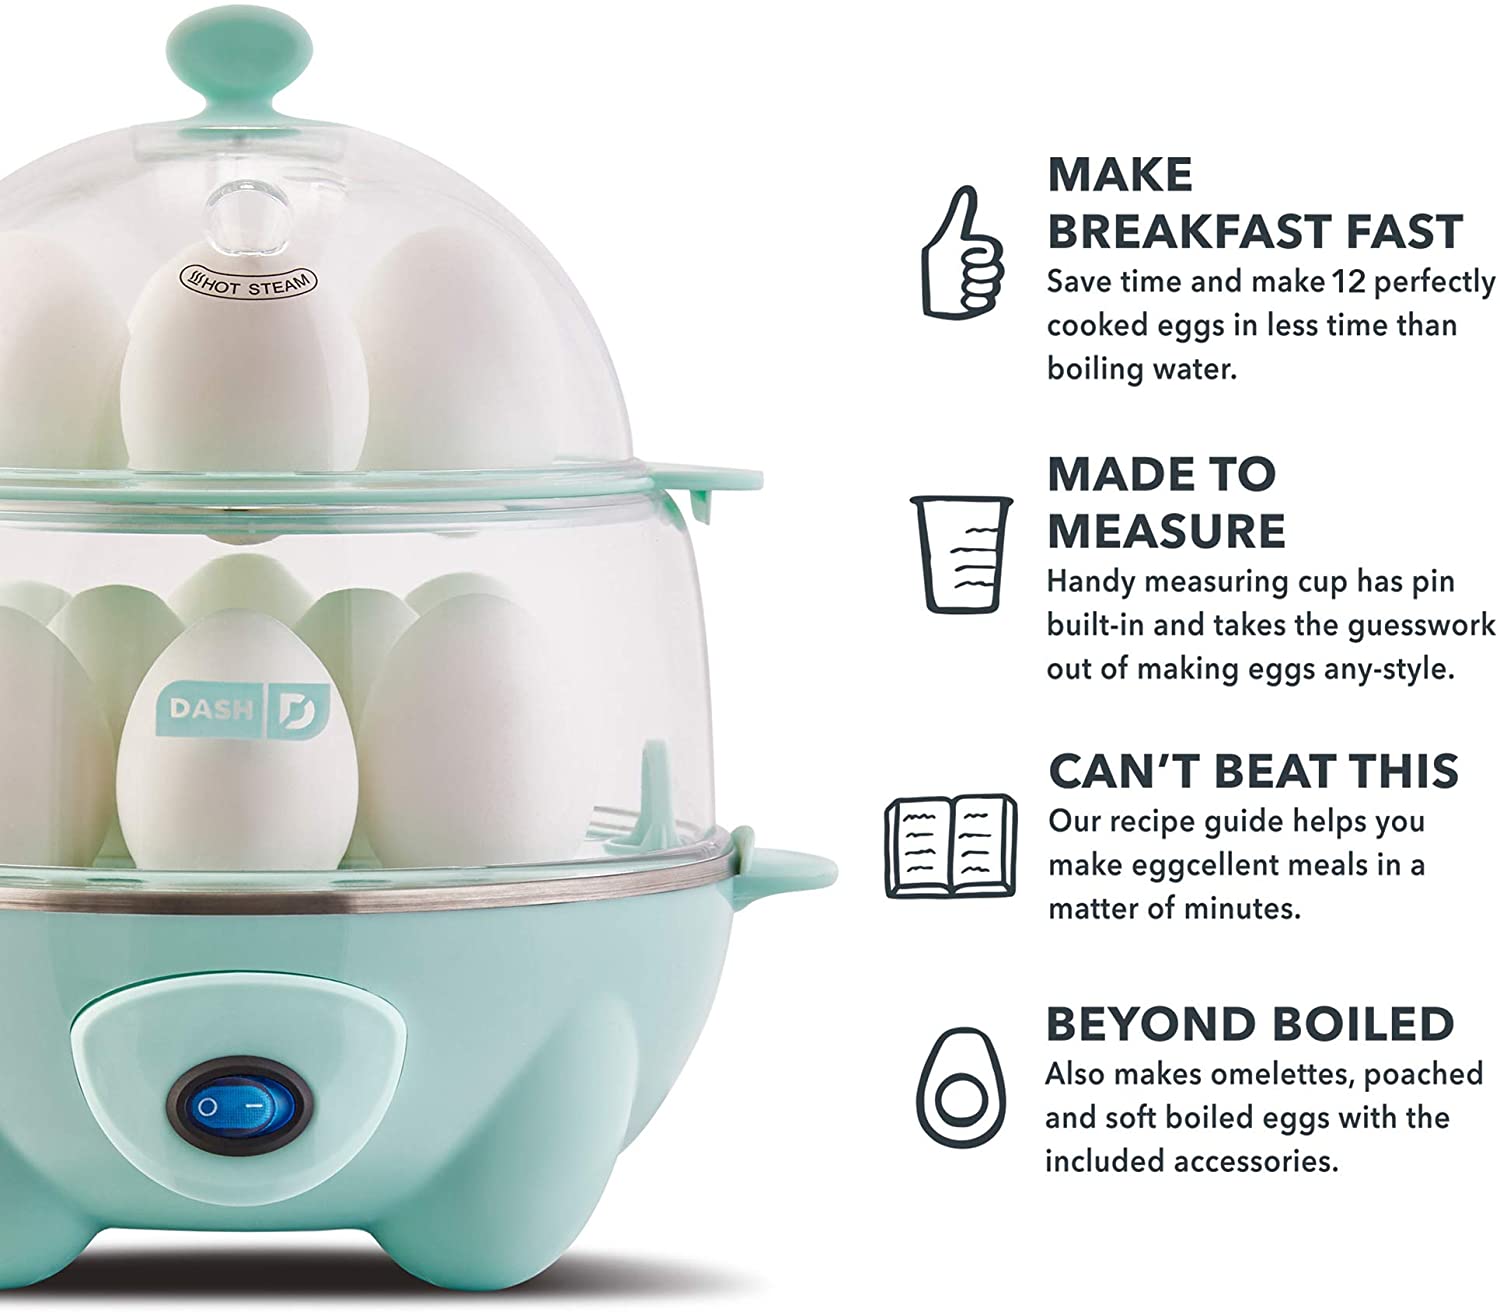 Dash Rapid Egg Cooker With Auto Shut Off Feature For Hard Boiled, Poached  And Scrambled Eggs, 12 Eggs Capacity - Gray : Target